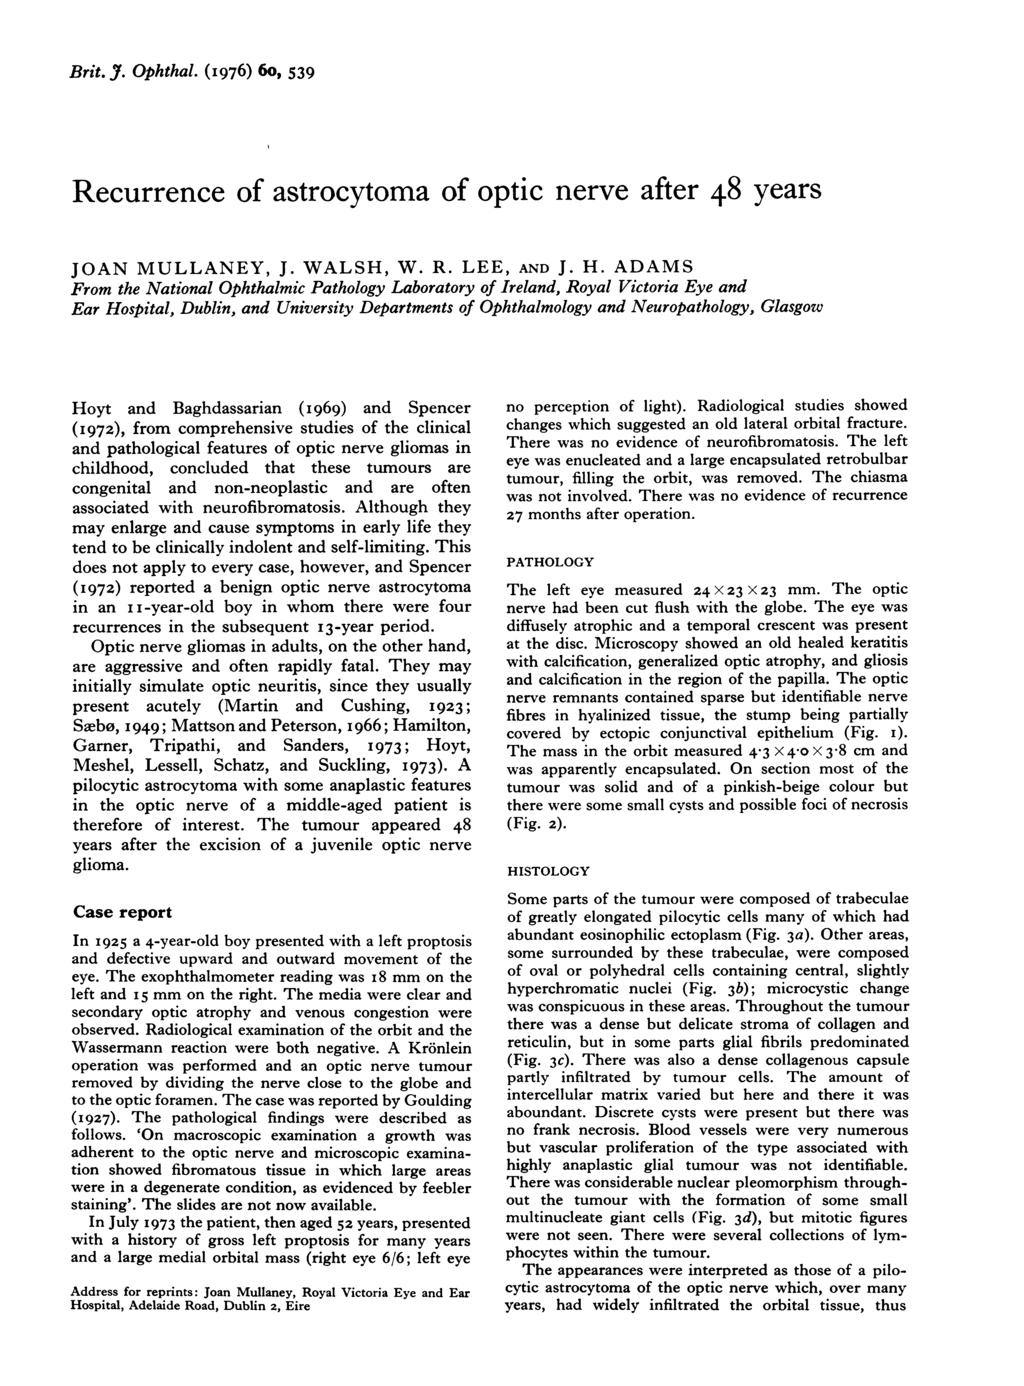 Brit. J. Ophthal. (1976) 6o, 539 Recurrence of astrocytoma of optic nerve after 48 years JOAN MULLANEY, J. WALSH, W. R. LEE, AND J. H.